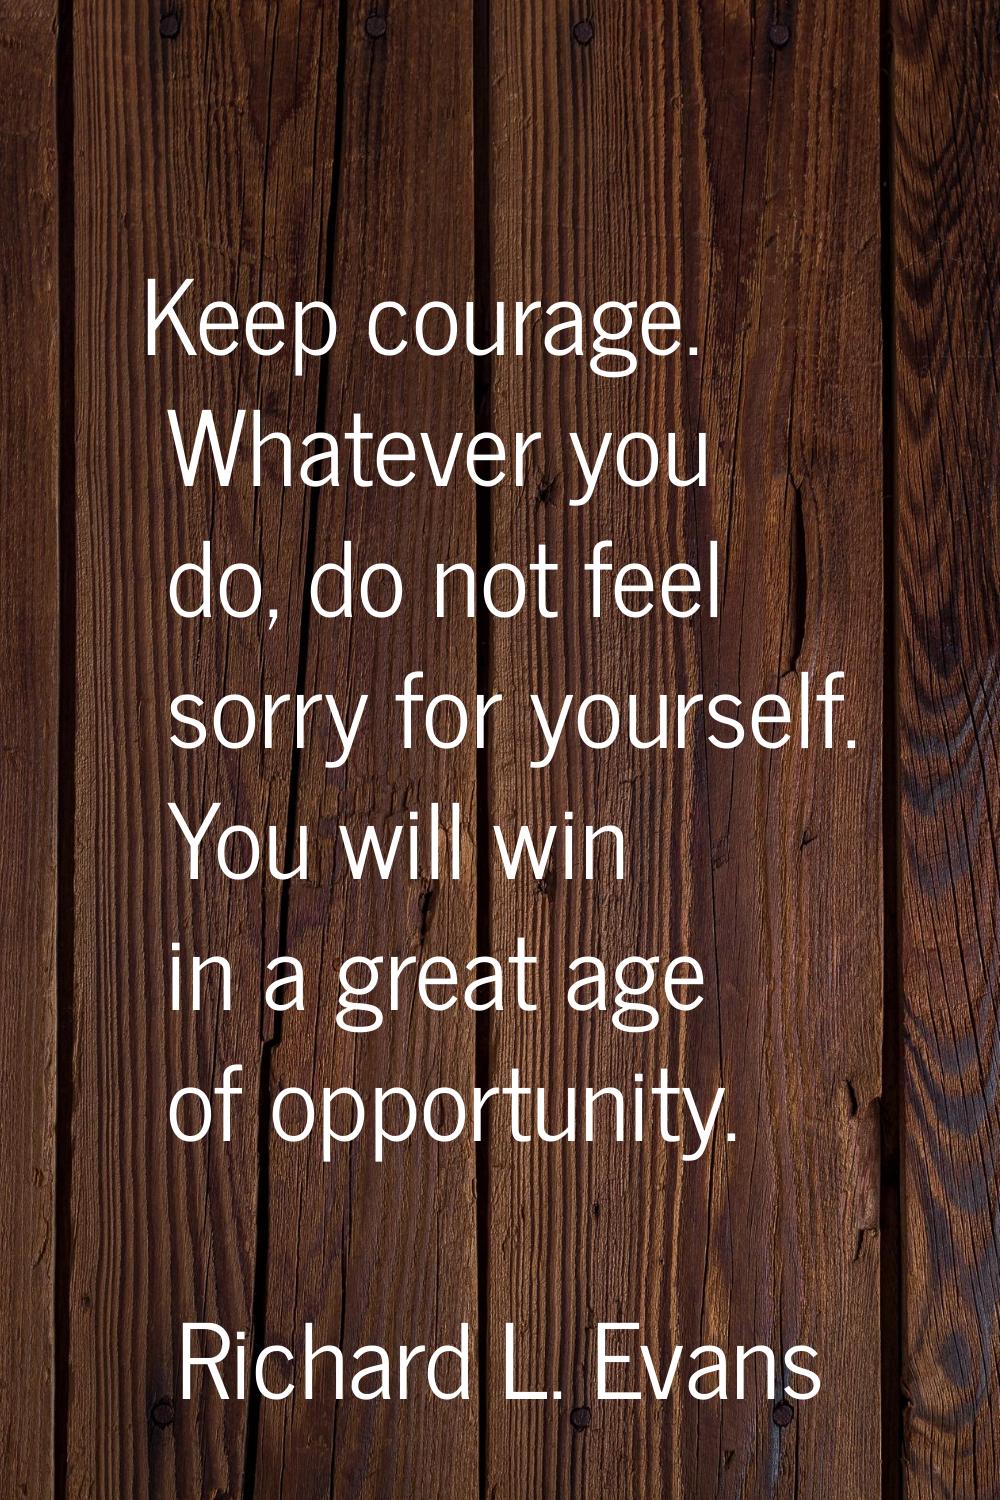 Keep courage. Whatever you do, do not feel sorry for yourself. You will win in a great age of oppor